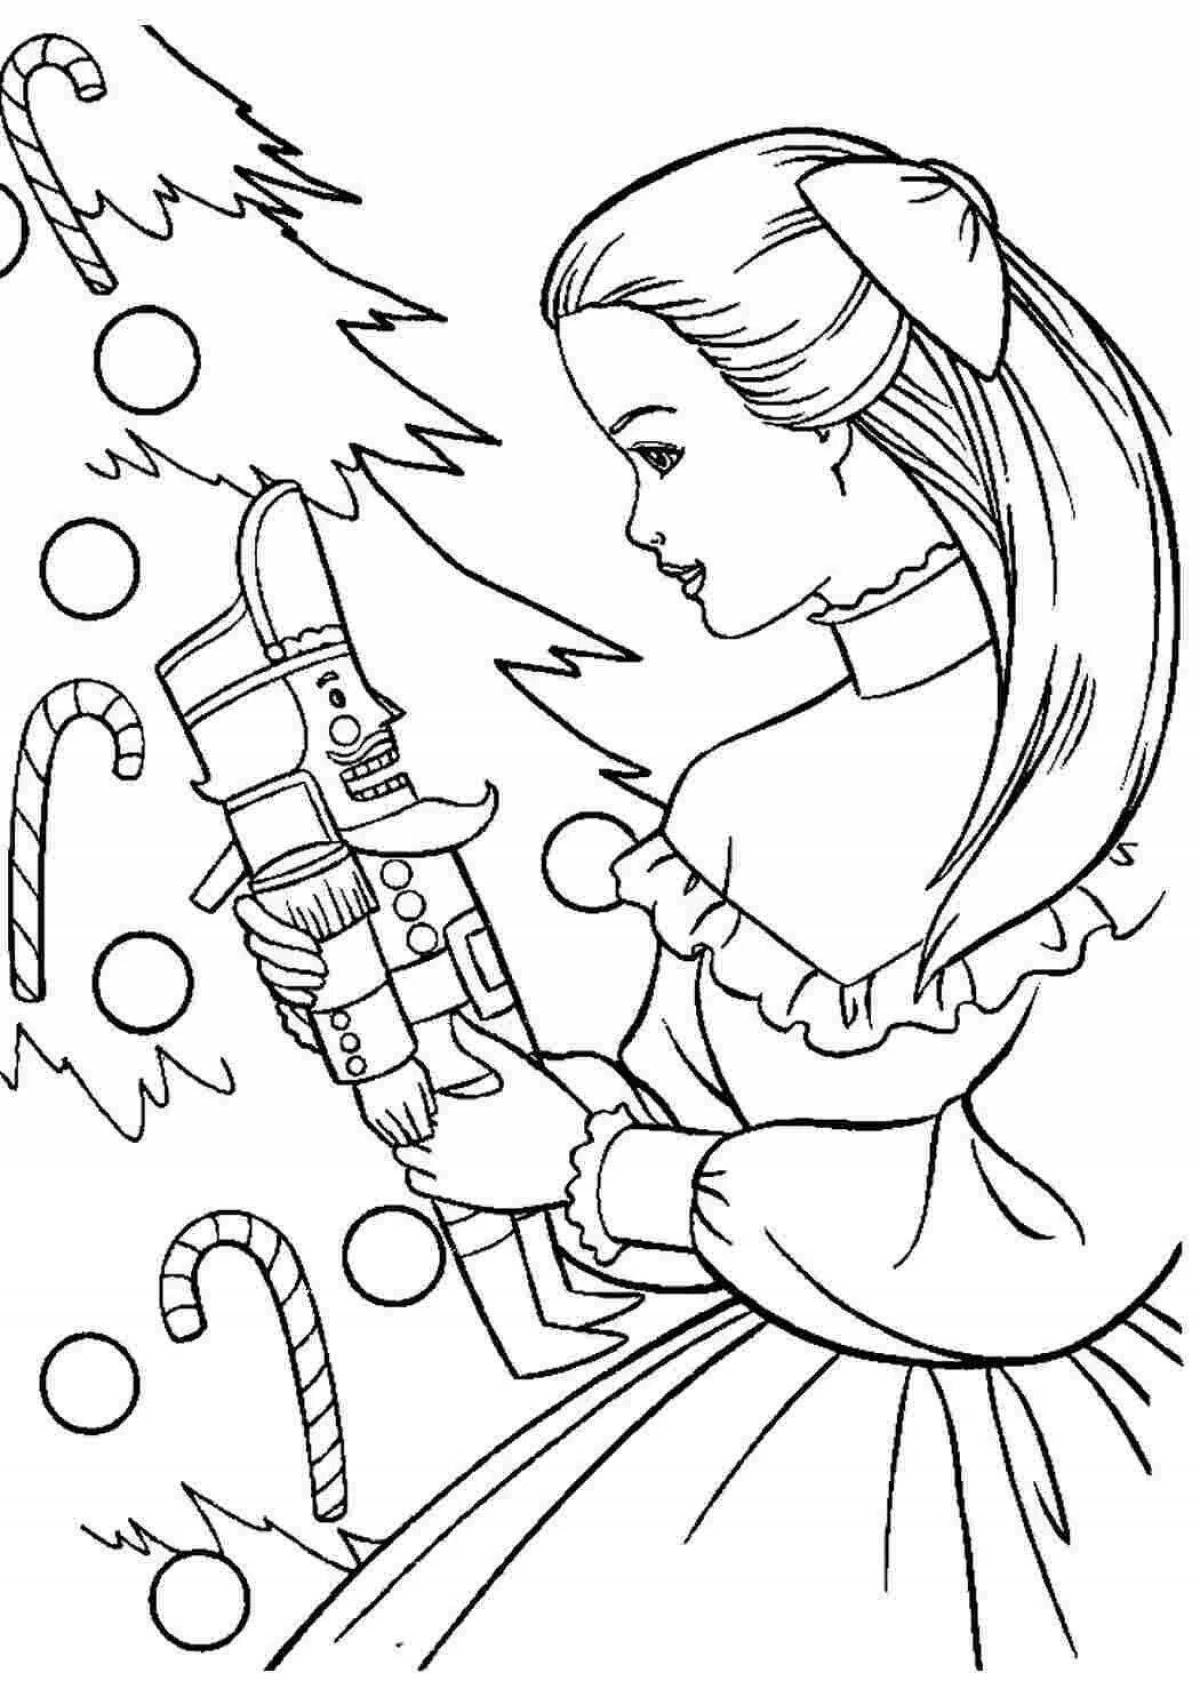 Elegant fairy tale coloring book for girls